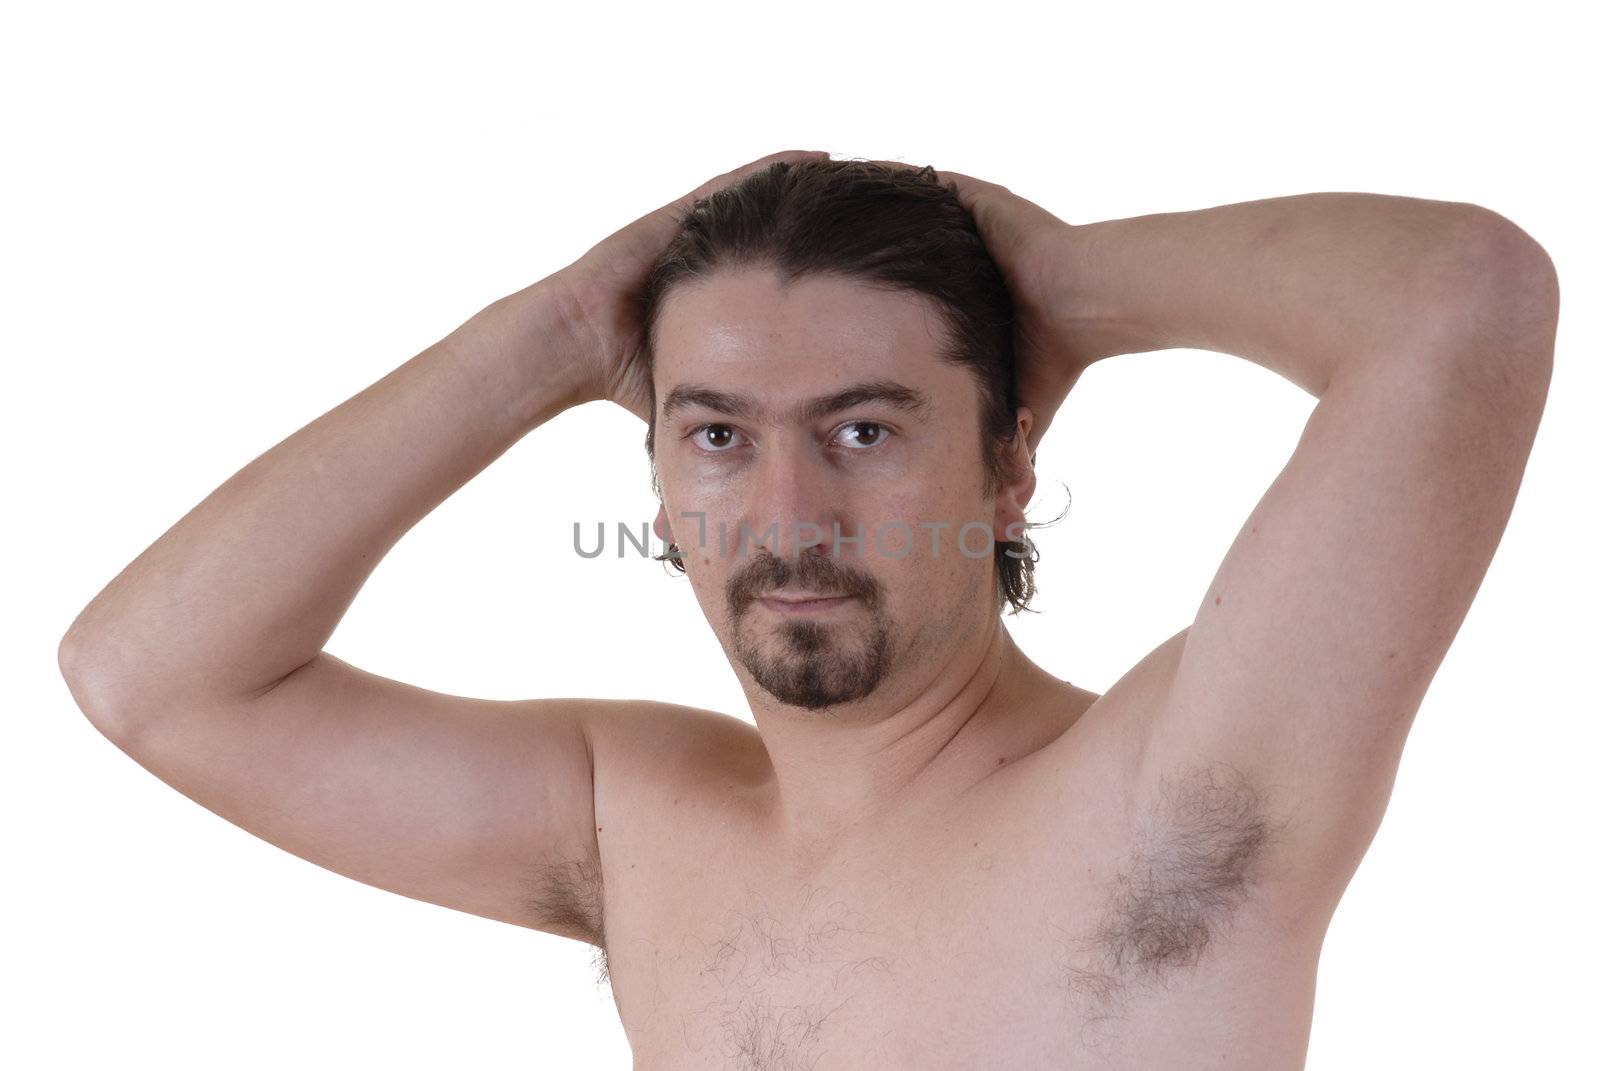 youg male without clothes in a white background portrait